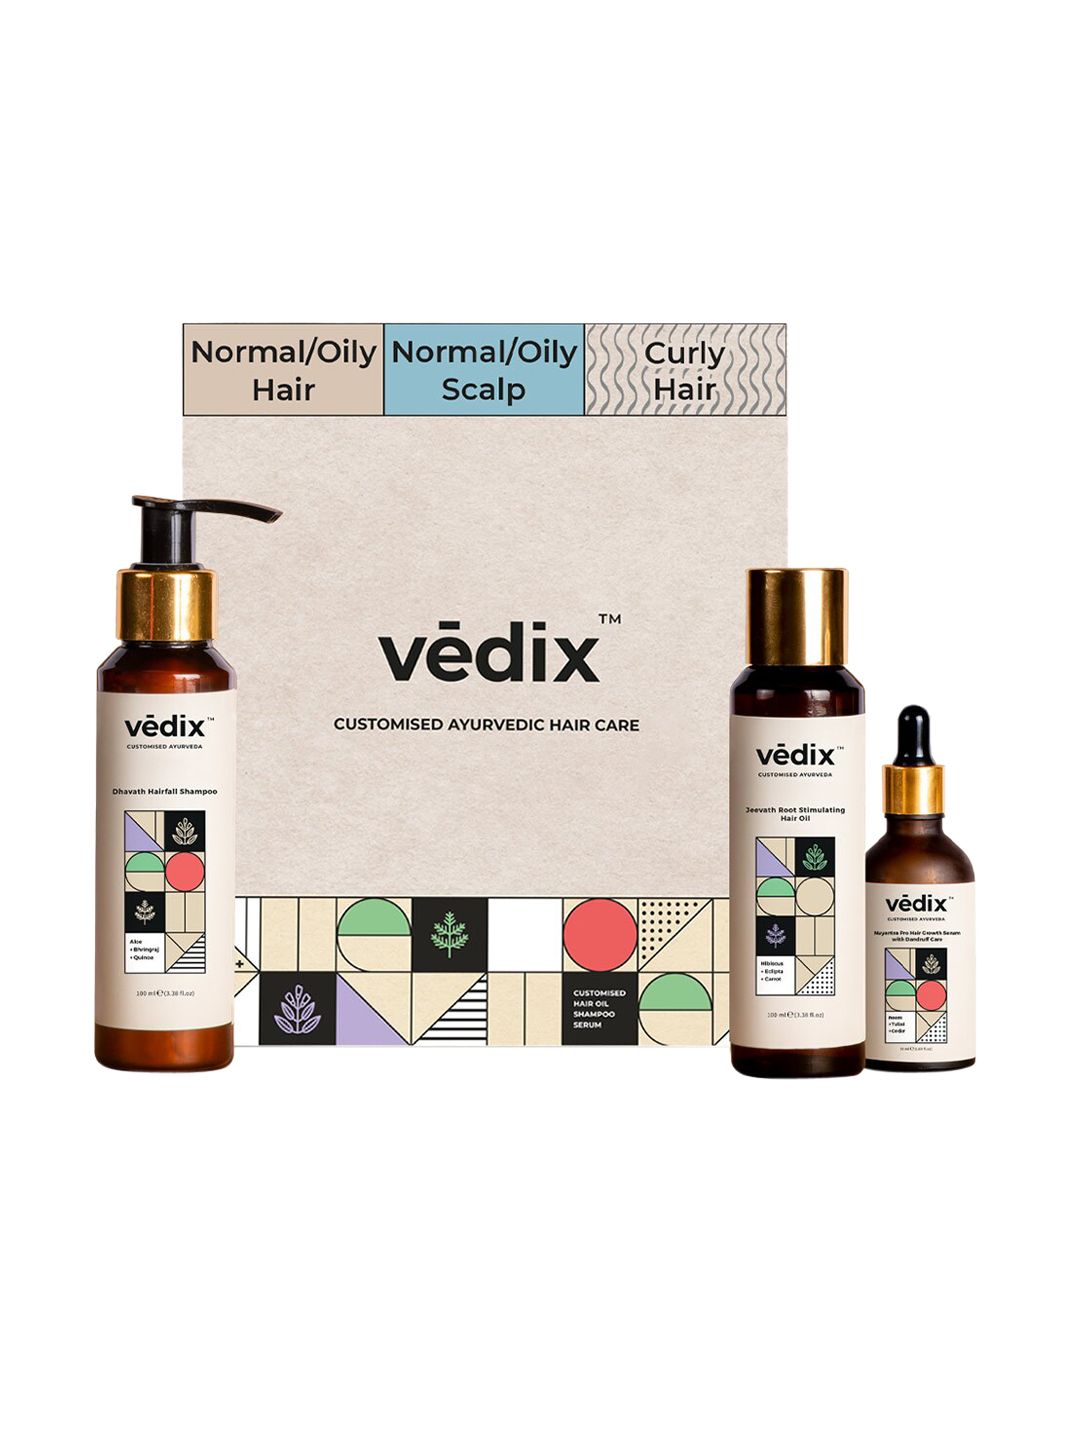 VEDIX Customized Hair Fall Control  Regimen for Normal/Oily Hair-Oily Scalp+Curly Hair Price in India